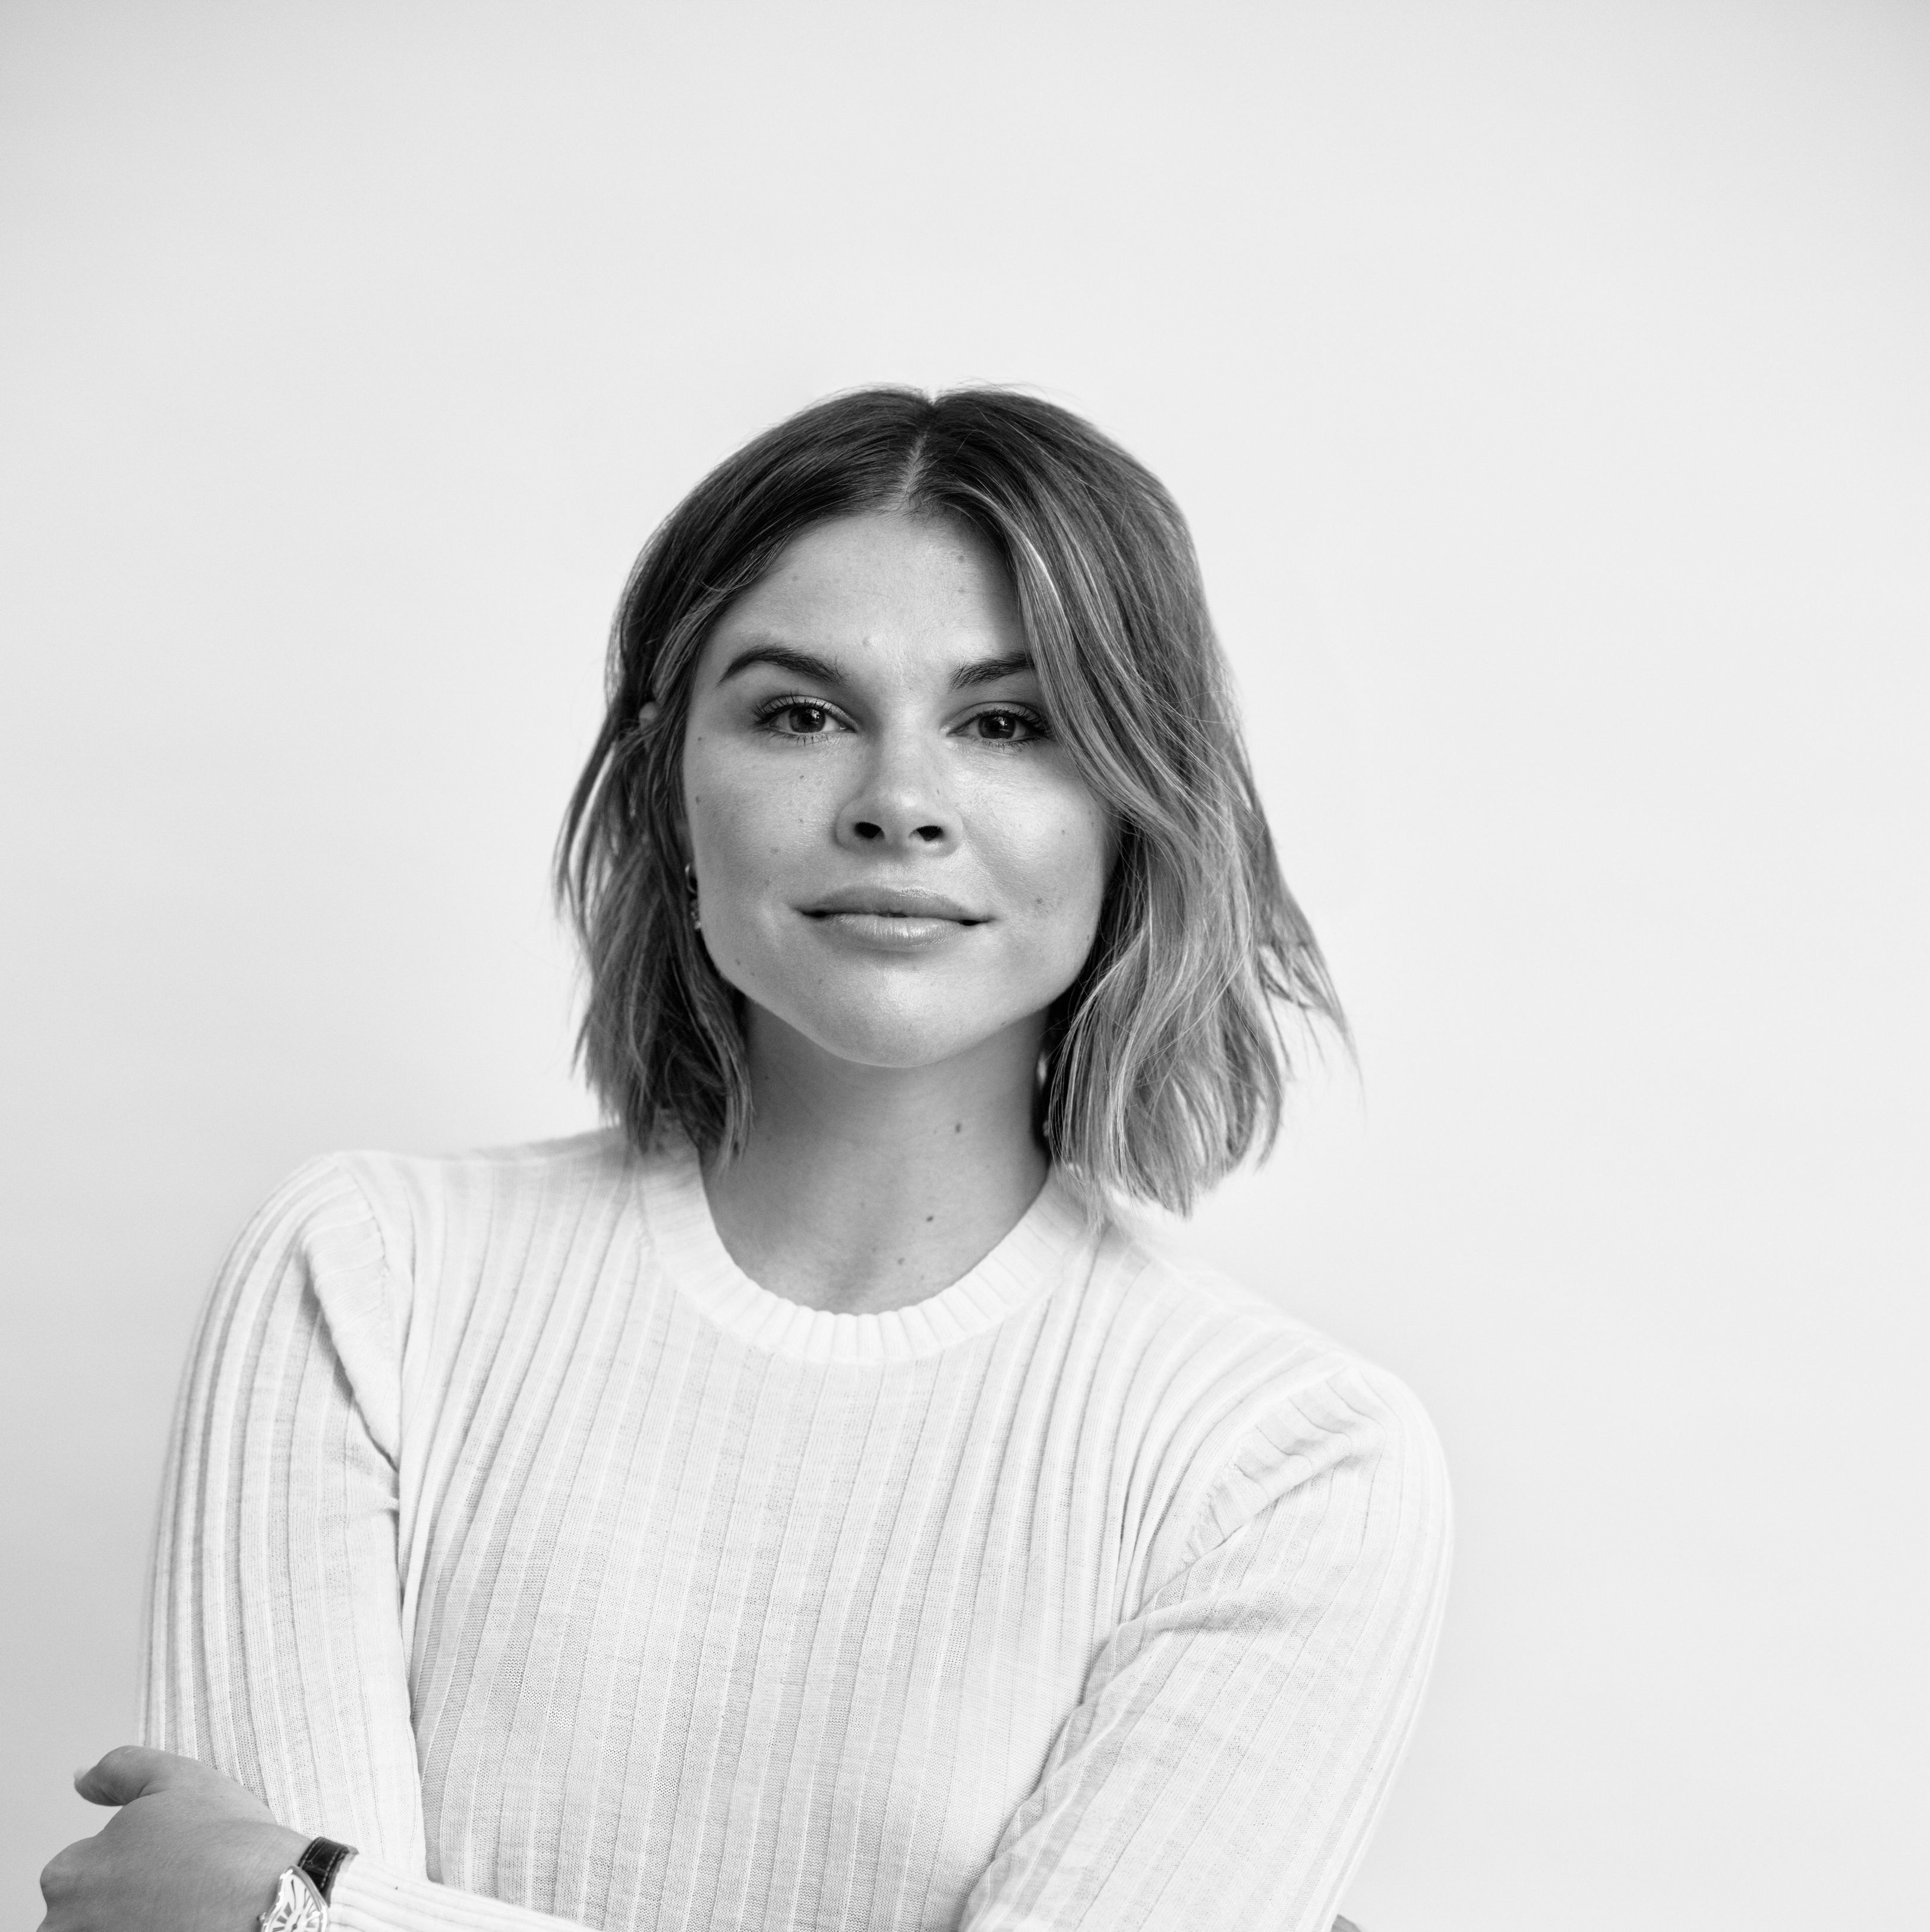 The beauty founder shaped the way we see ourselves. Now, she's working to make Glossier a 100-year brand (even if that means reading the TikTok comments).